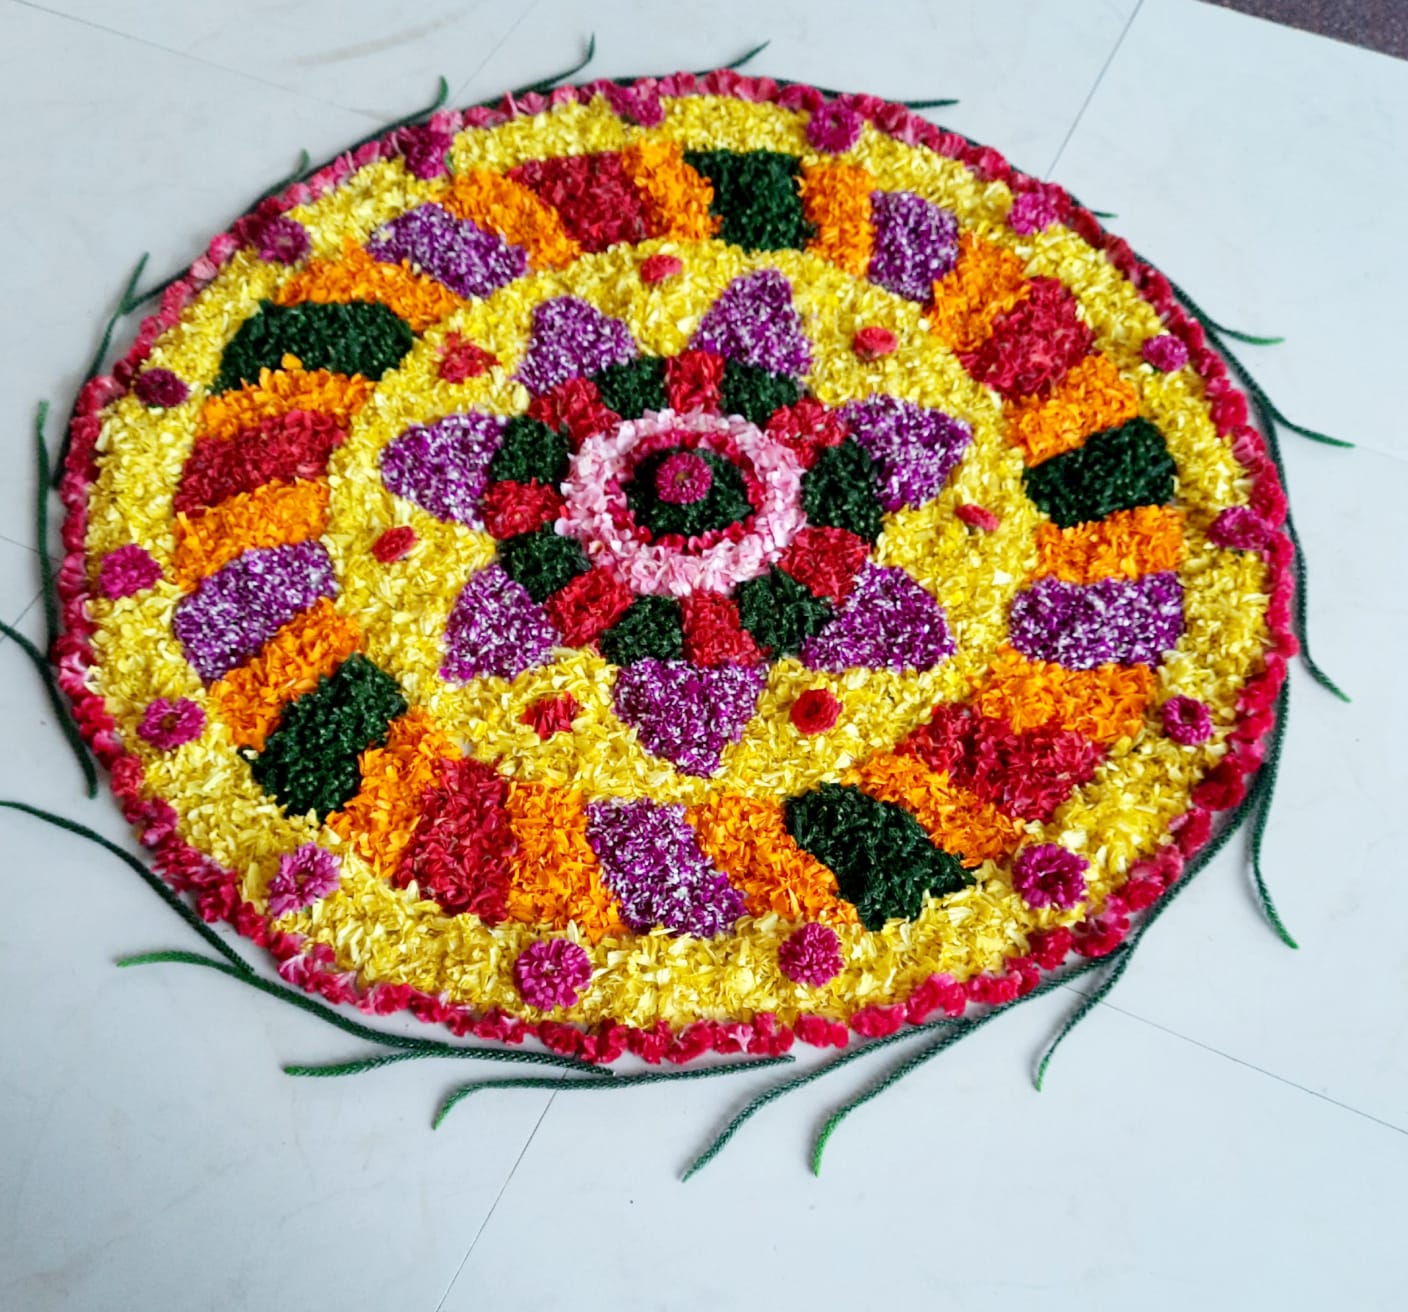 The Pookkalam